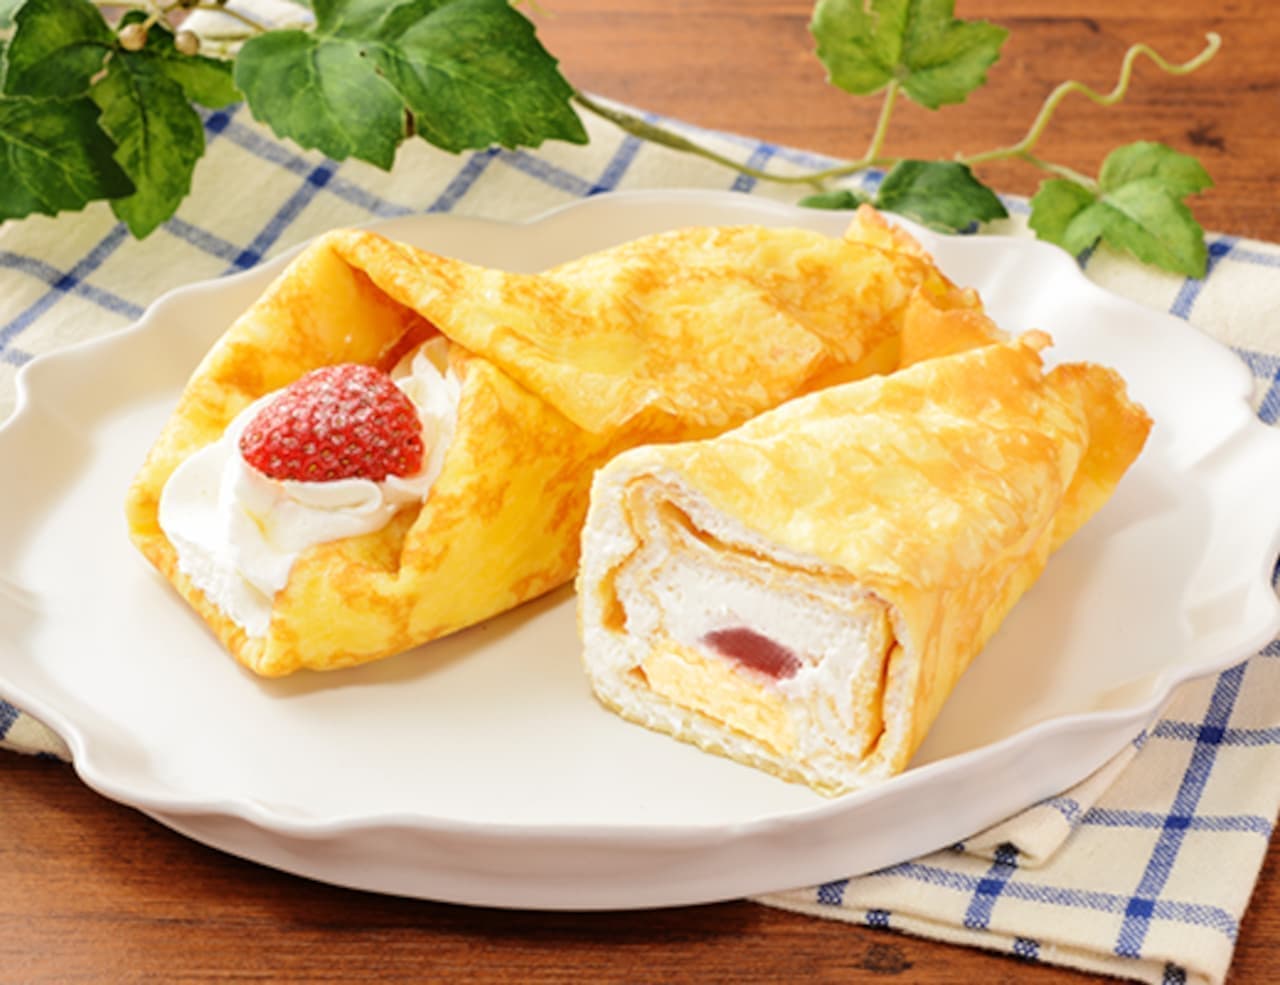 Lawson "Strawberry and Baked Cheese Crepe"